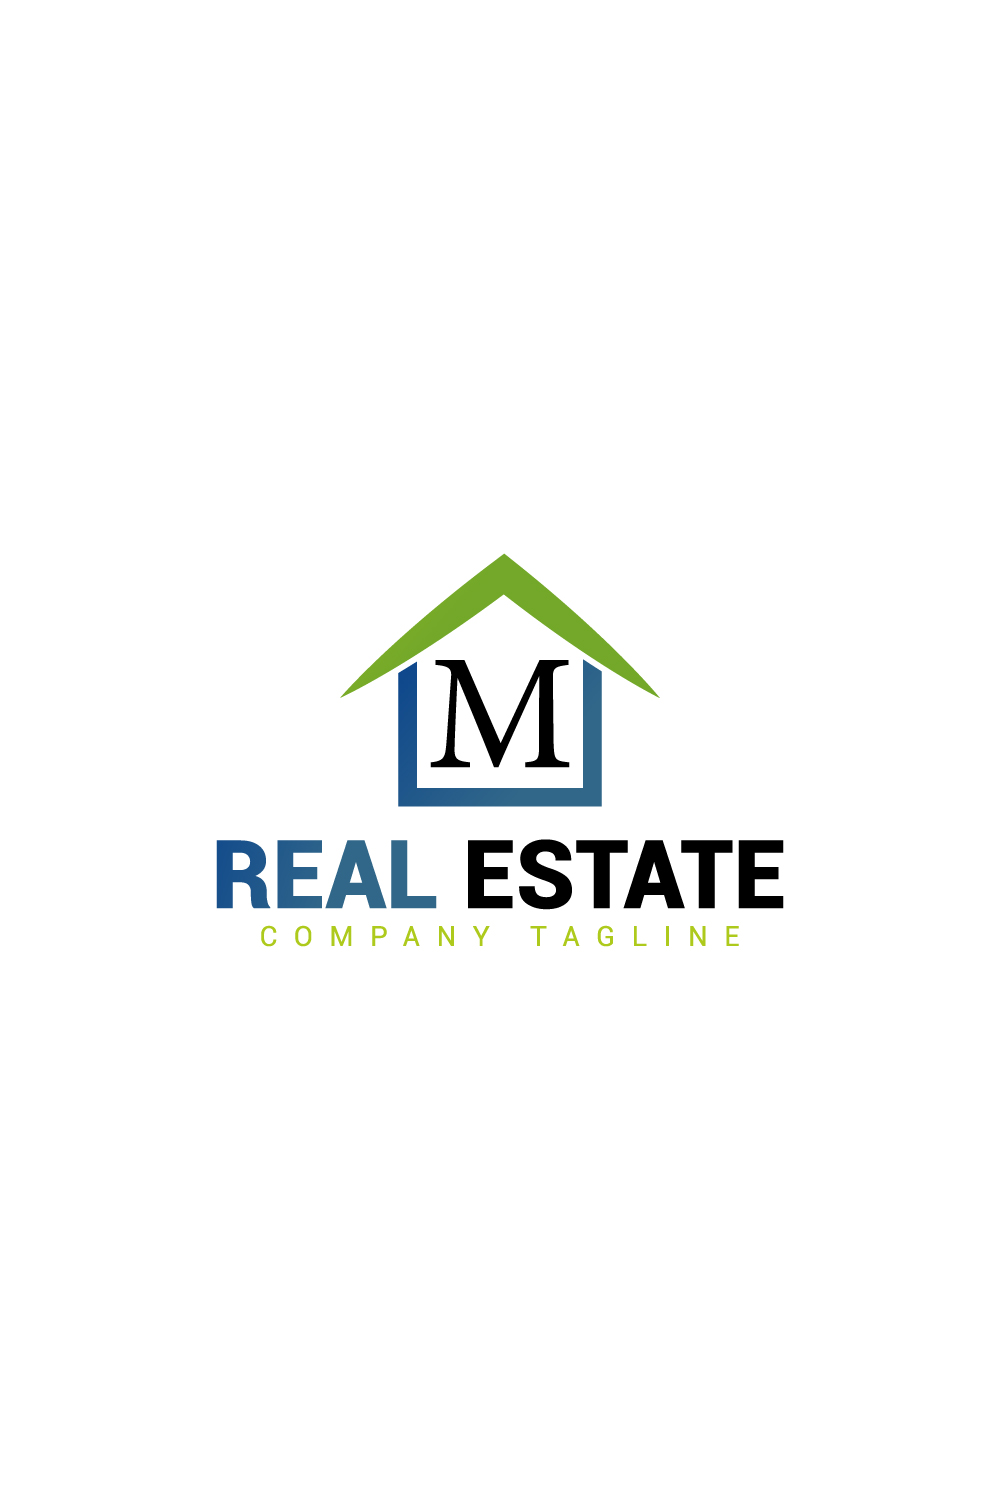 Real estate logo with green, dark blue color and M letter pinterest preview image.